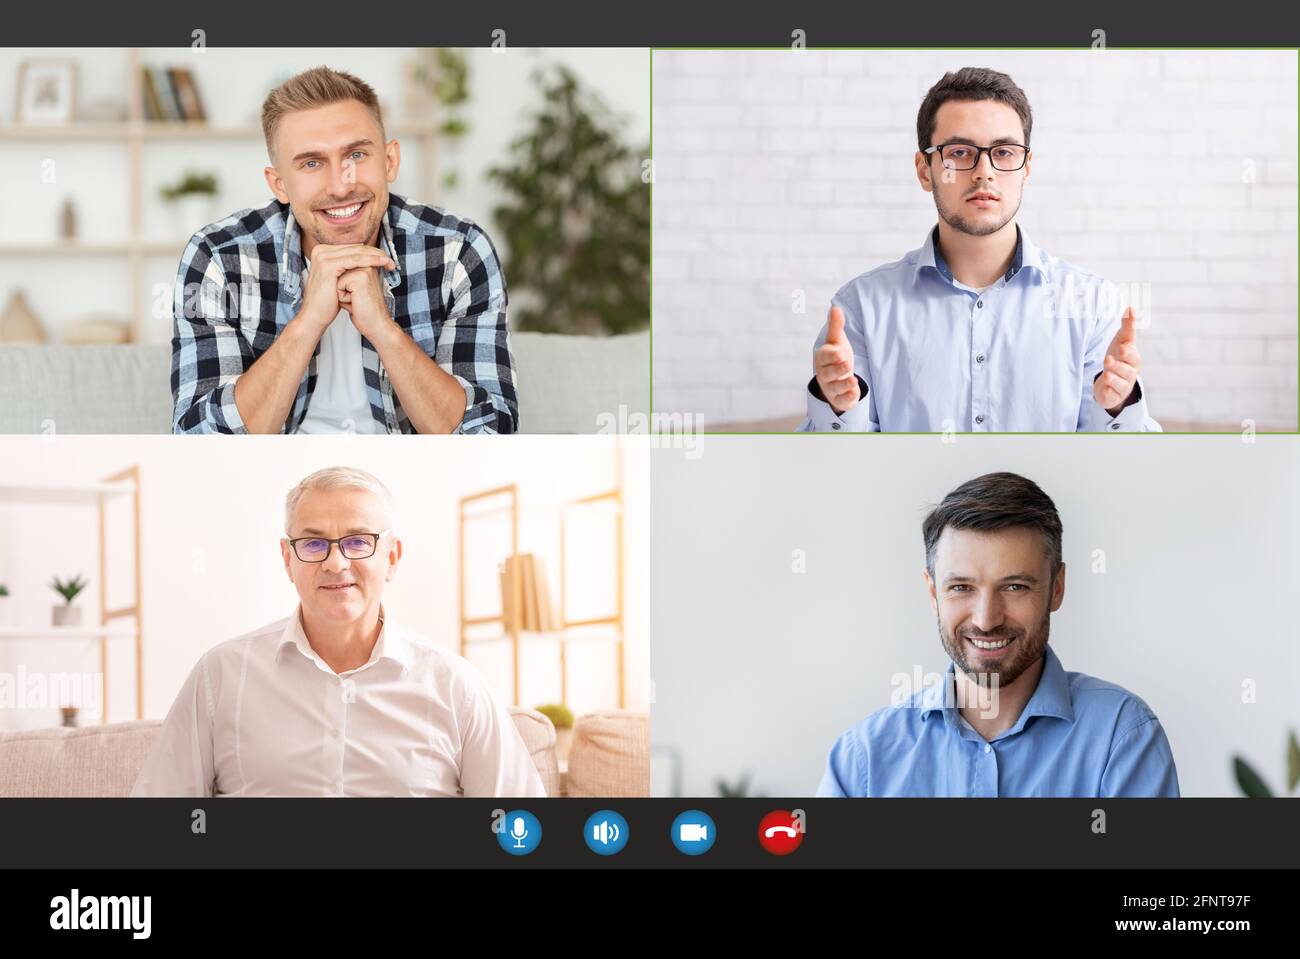 Monitor screen with cheerful men having group video chat, speaking to each other via internet Stock Photo